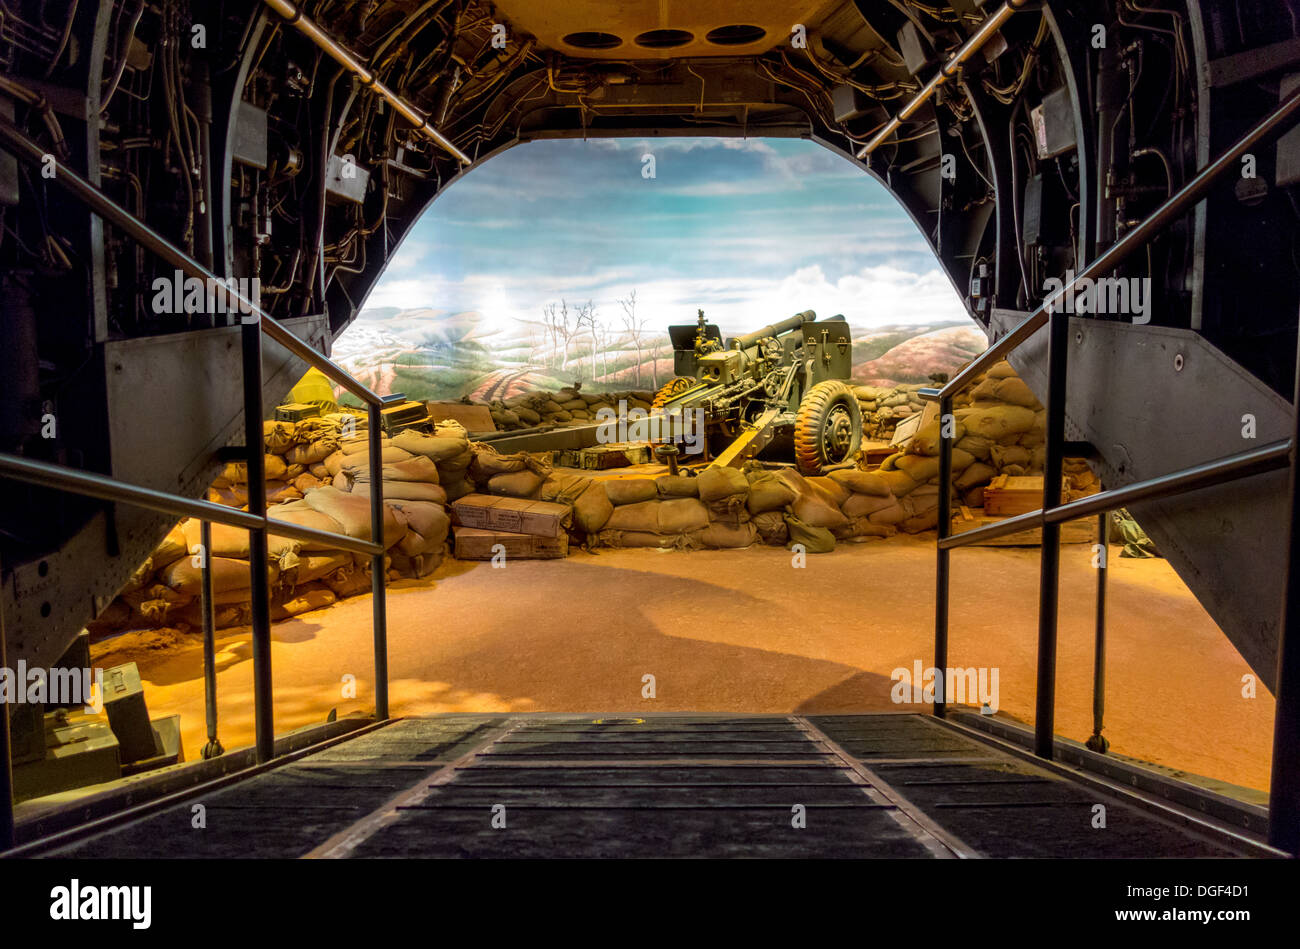 National Museum of the Marine Corps. Khe Sanh Vietnam immersive Hill 881 d'exposition galerie du Sud. Quantico, Virginie, USA. Banque D'Images